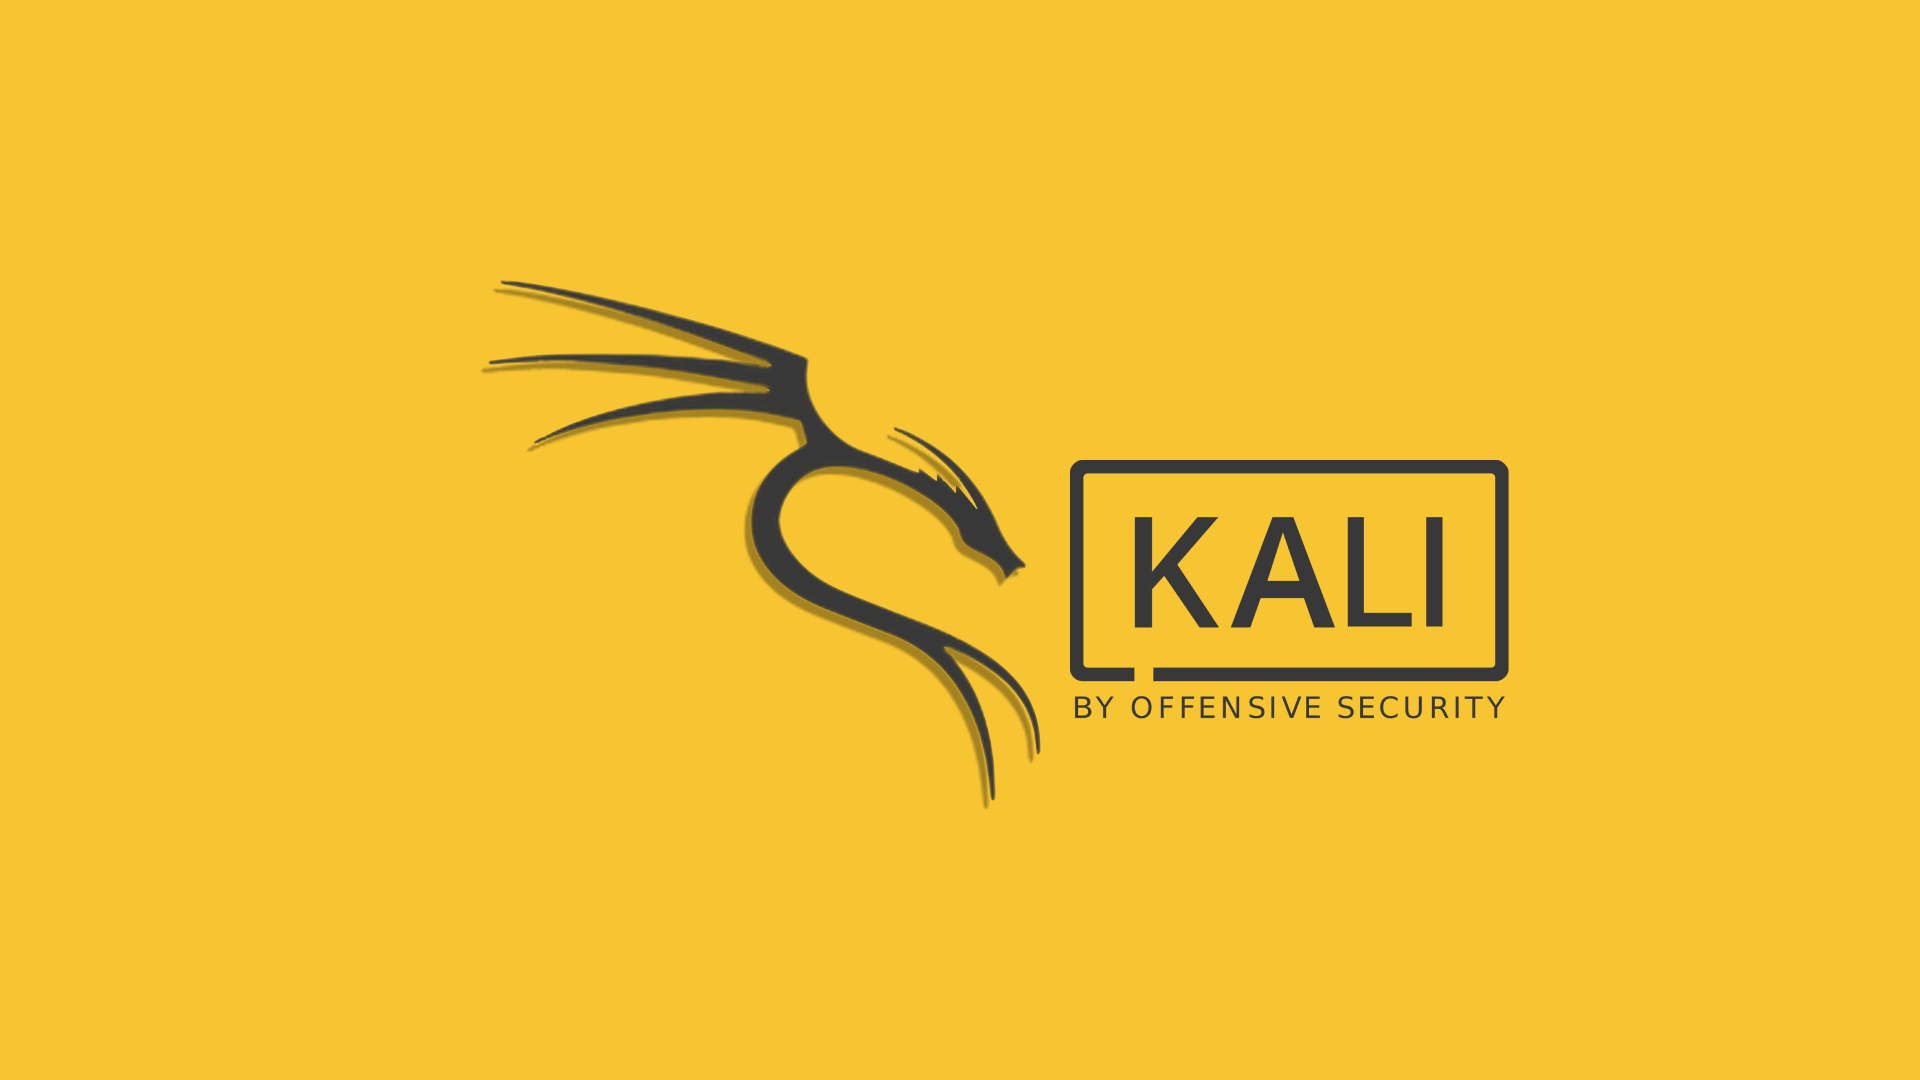 Kali Linux HD Wallpaper and Background